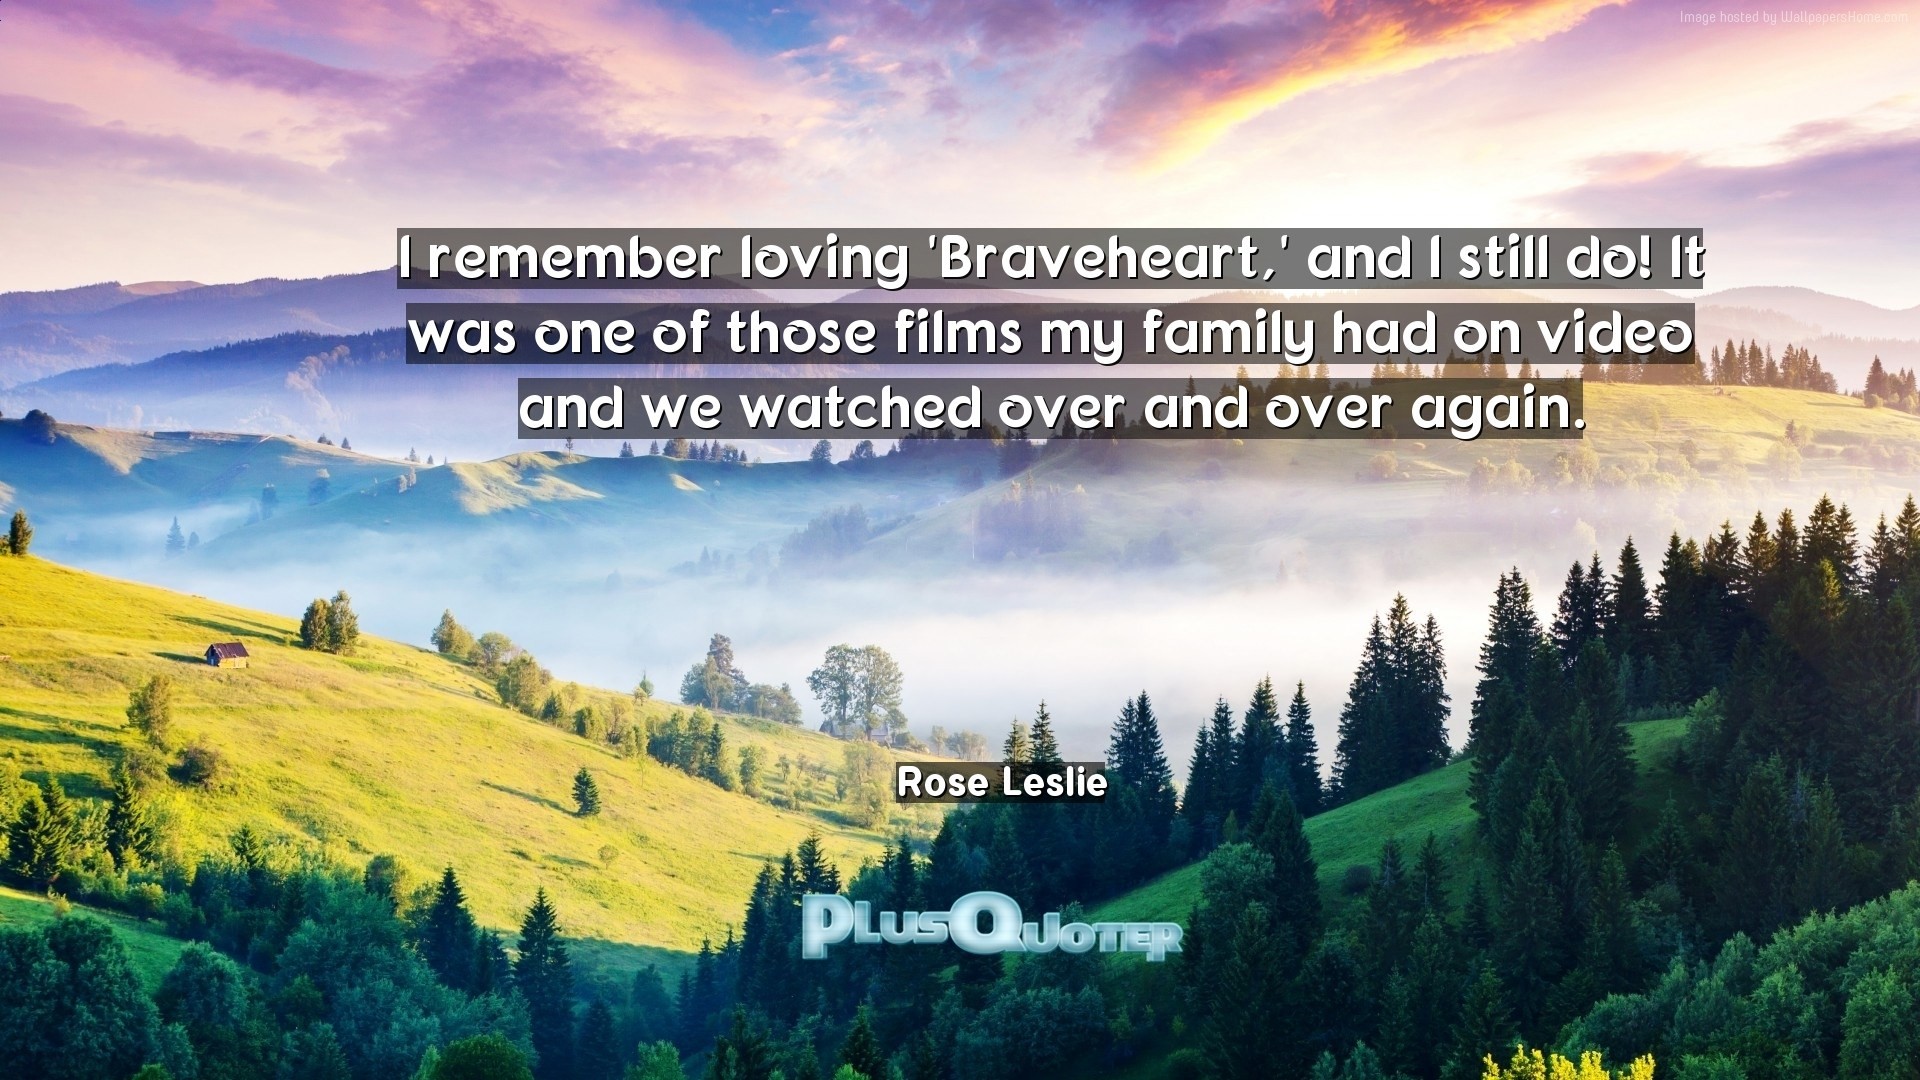 1920x1080 Download Wallpaper with inspirational Quotes- "I remember loving